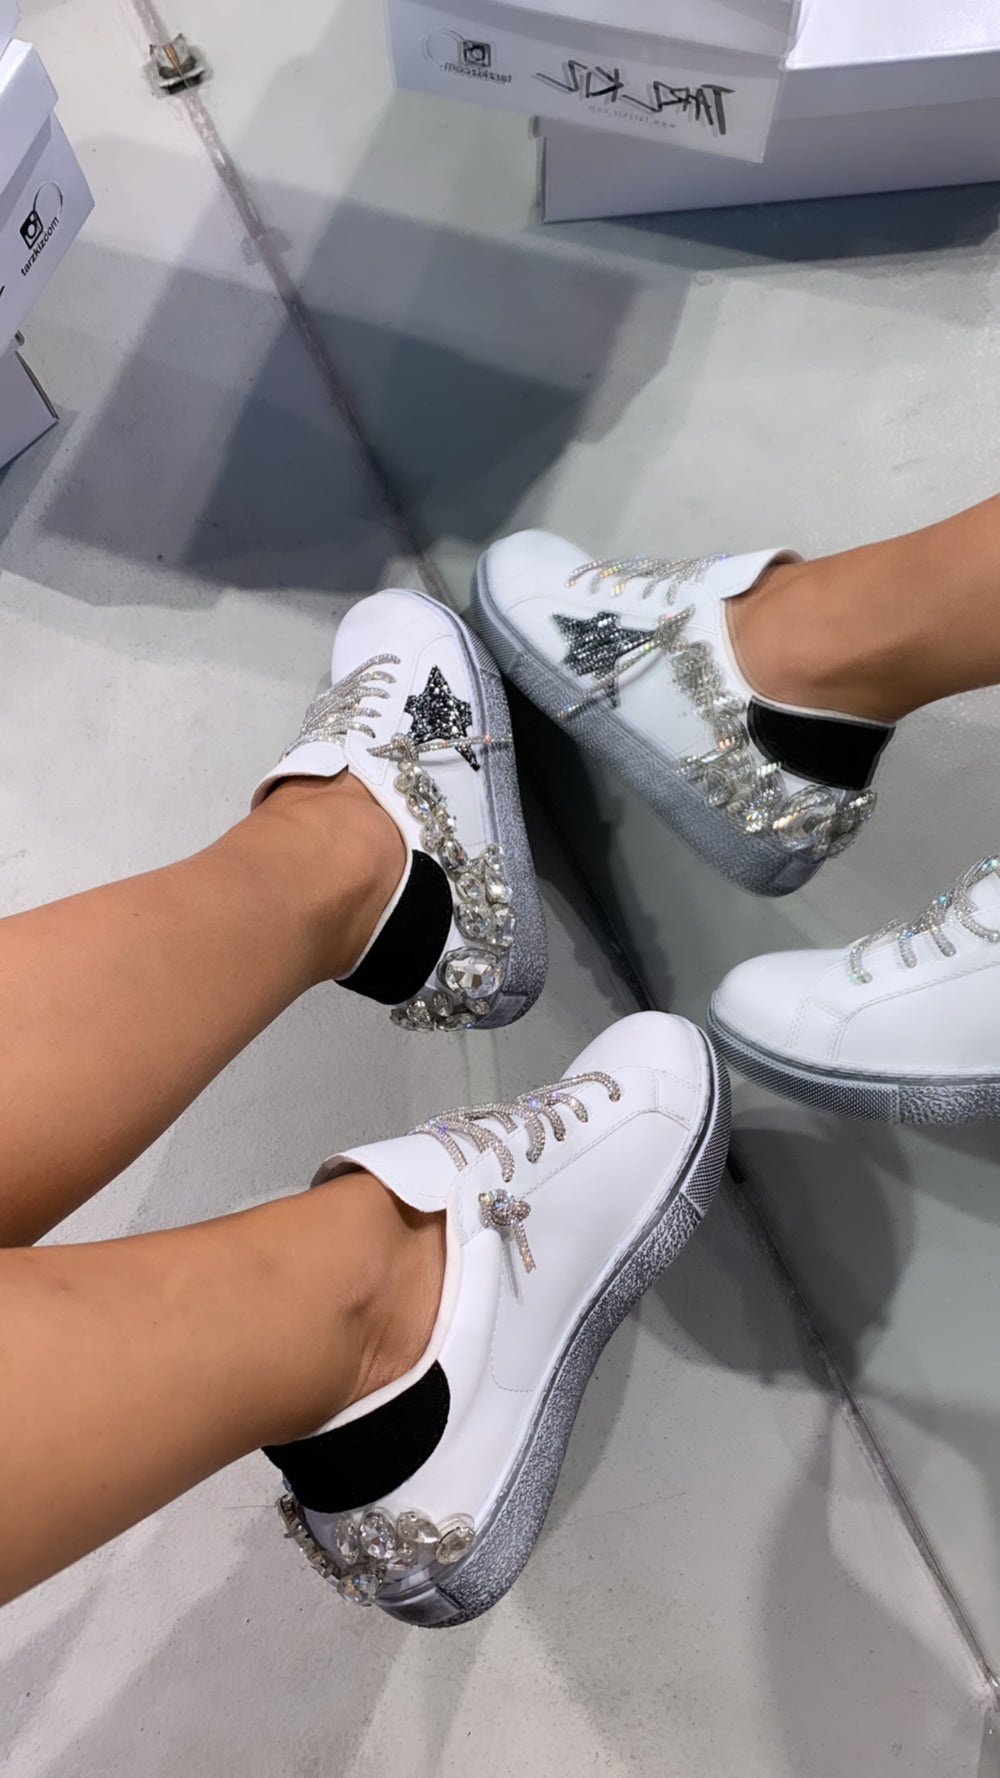 CRYSTALSTONE SNEAKERS